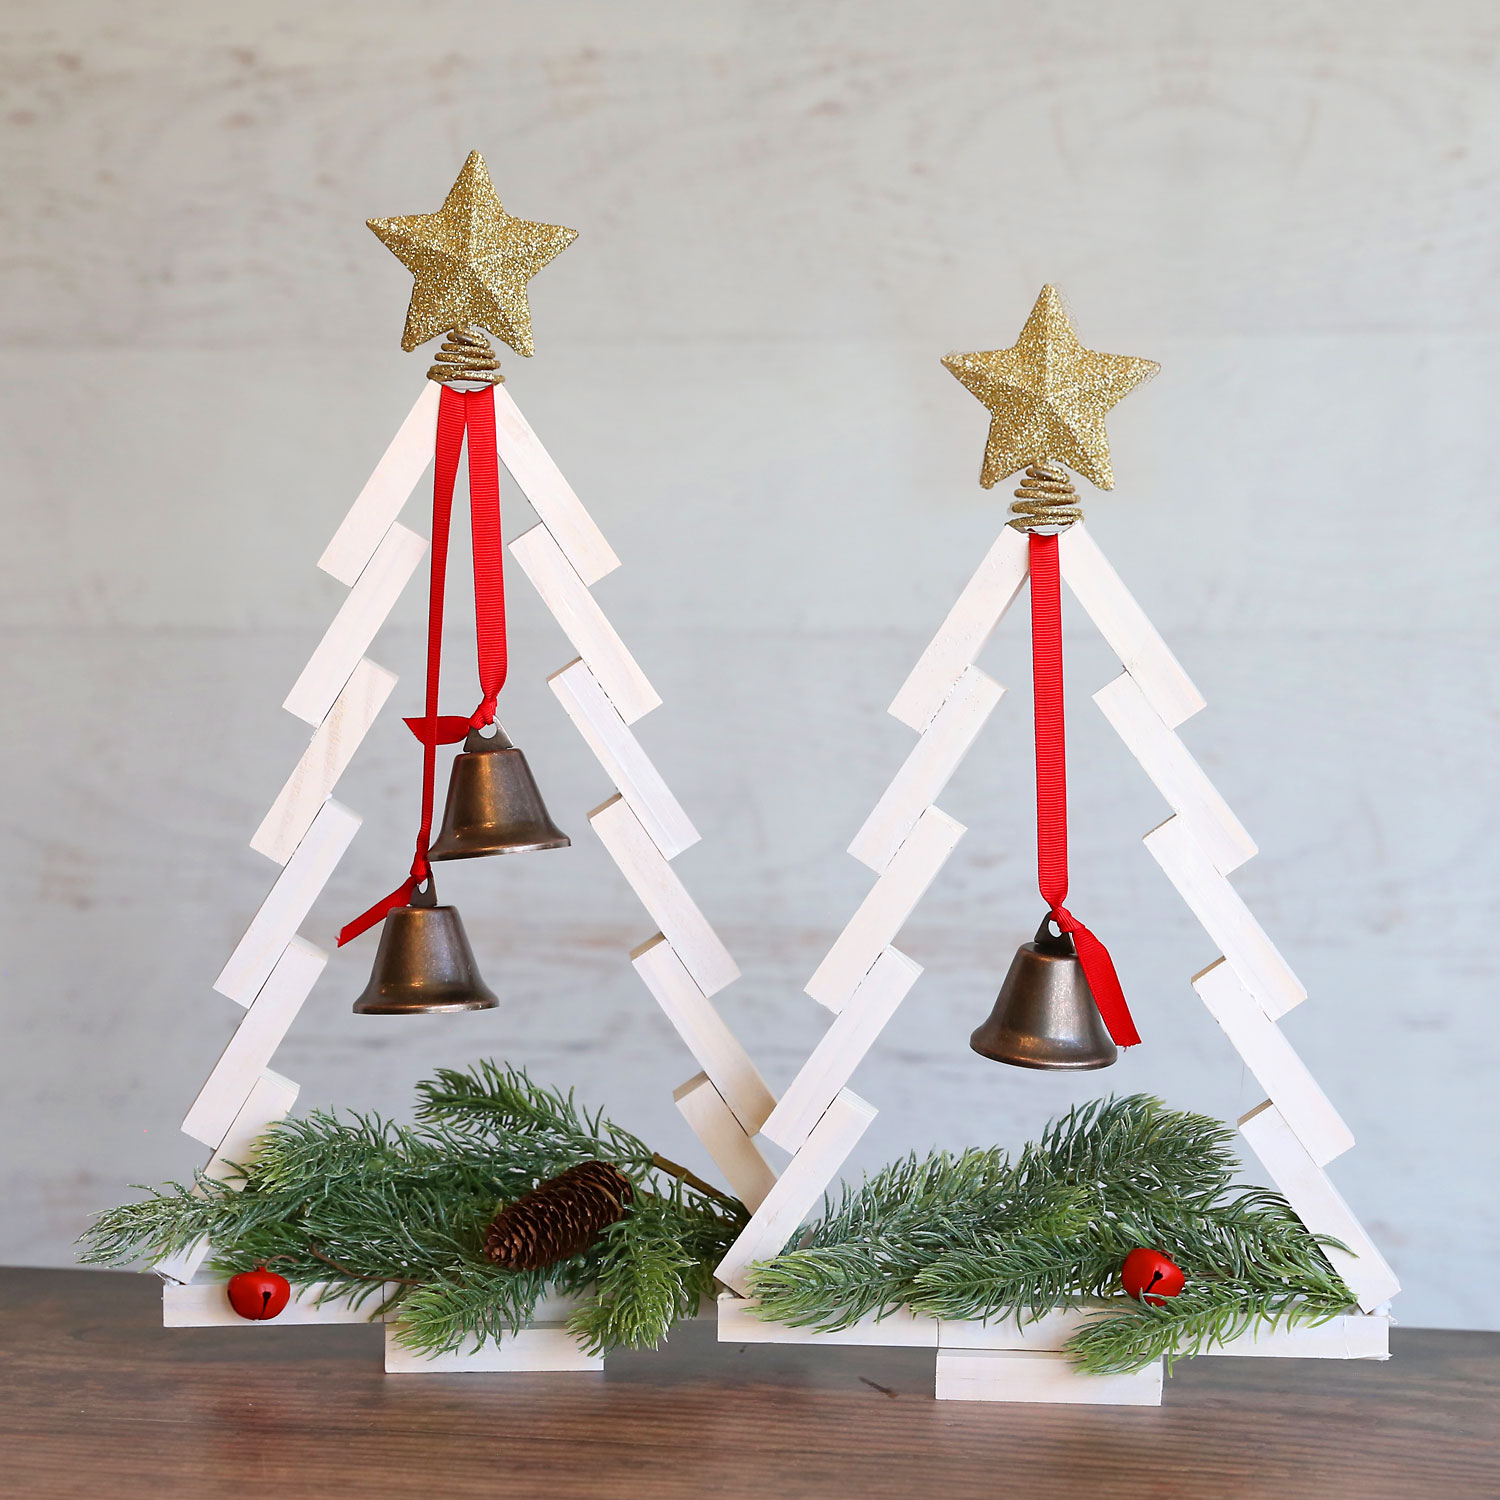 How We Made Christmas Bells Using Dollar Tree Items